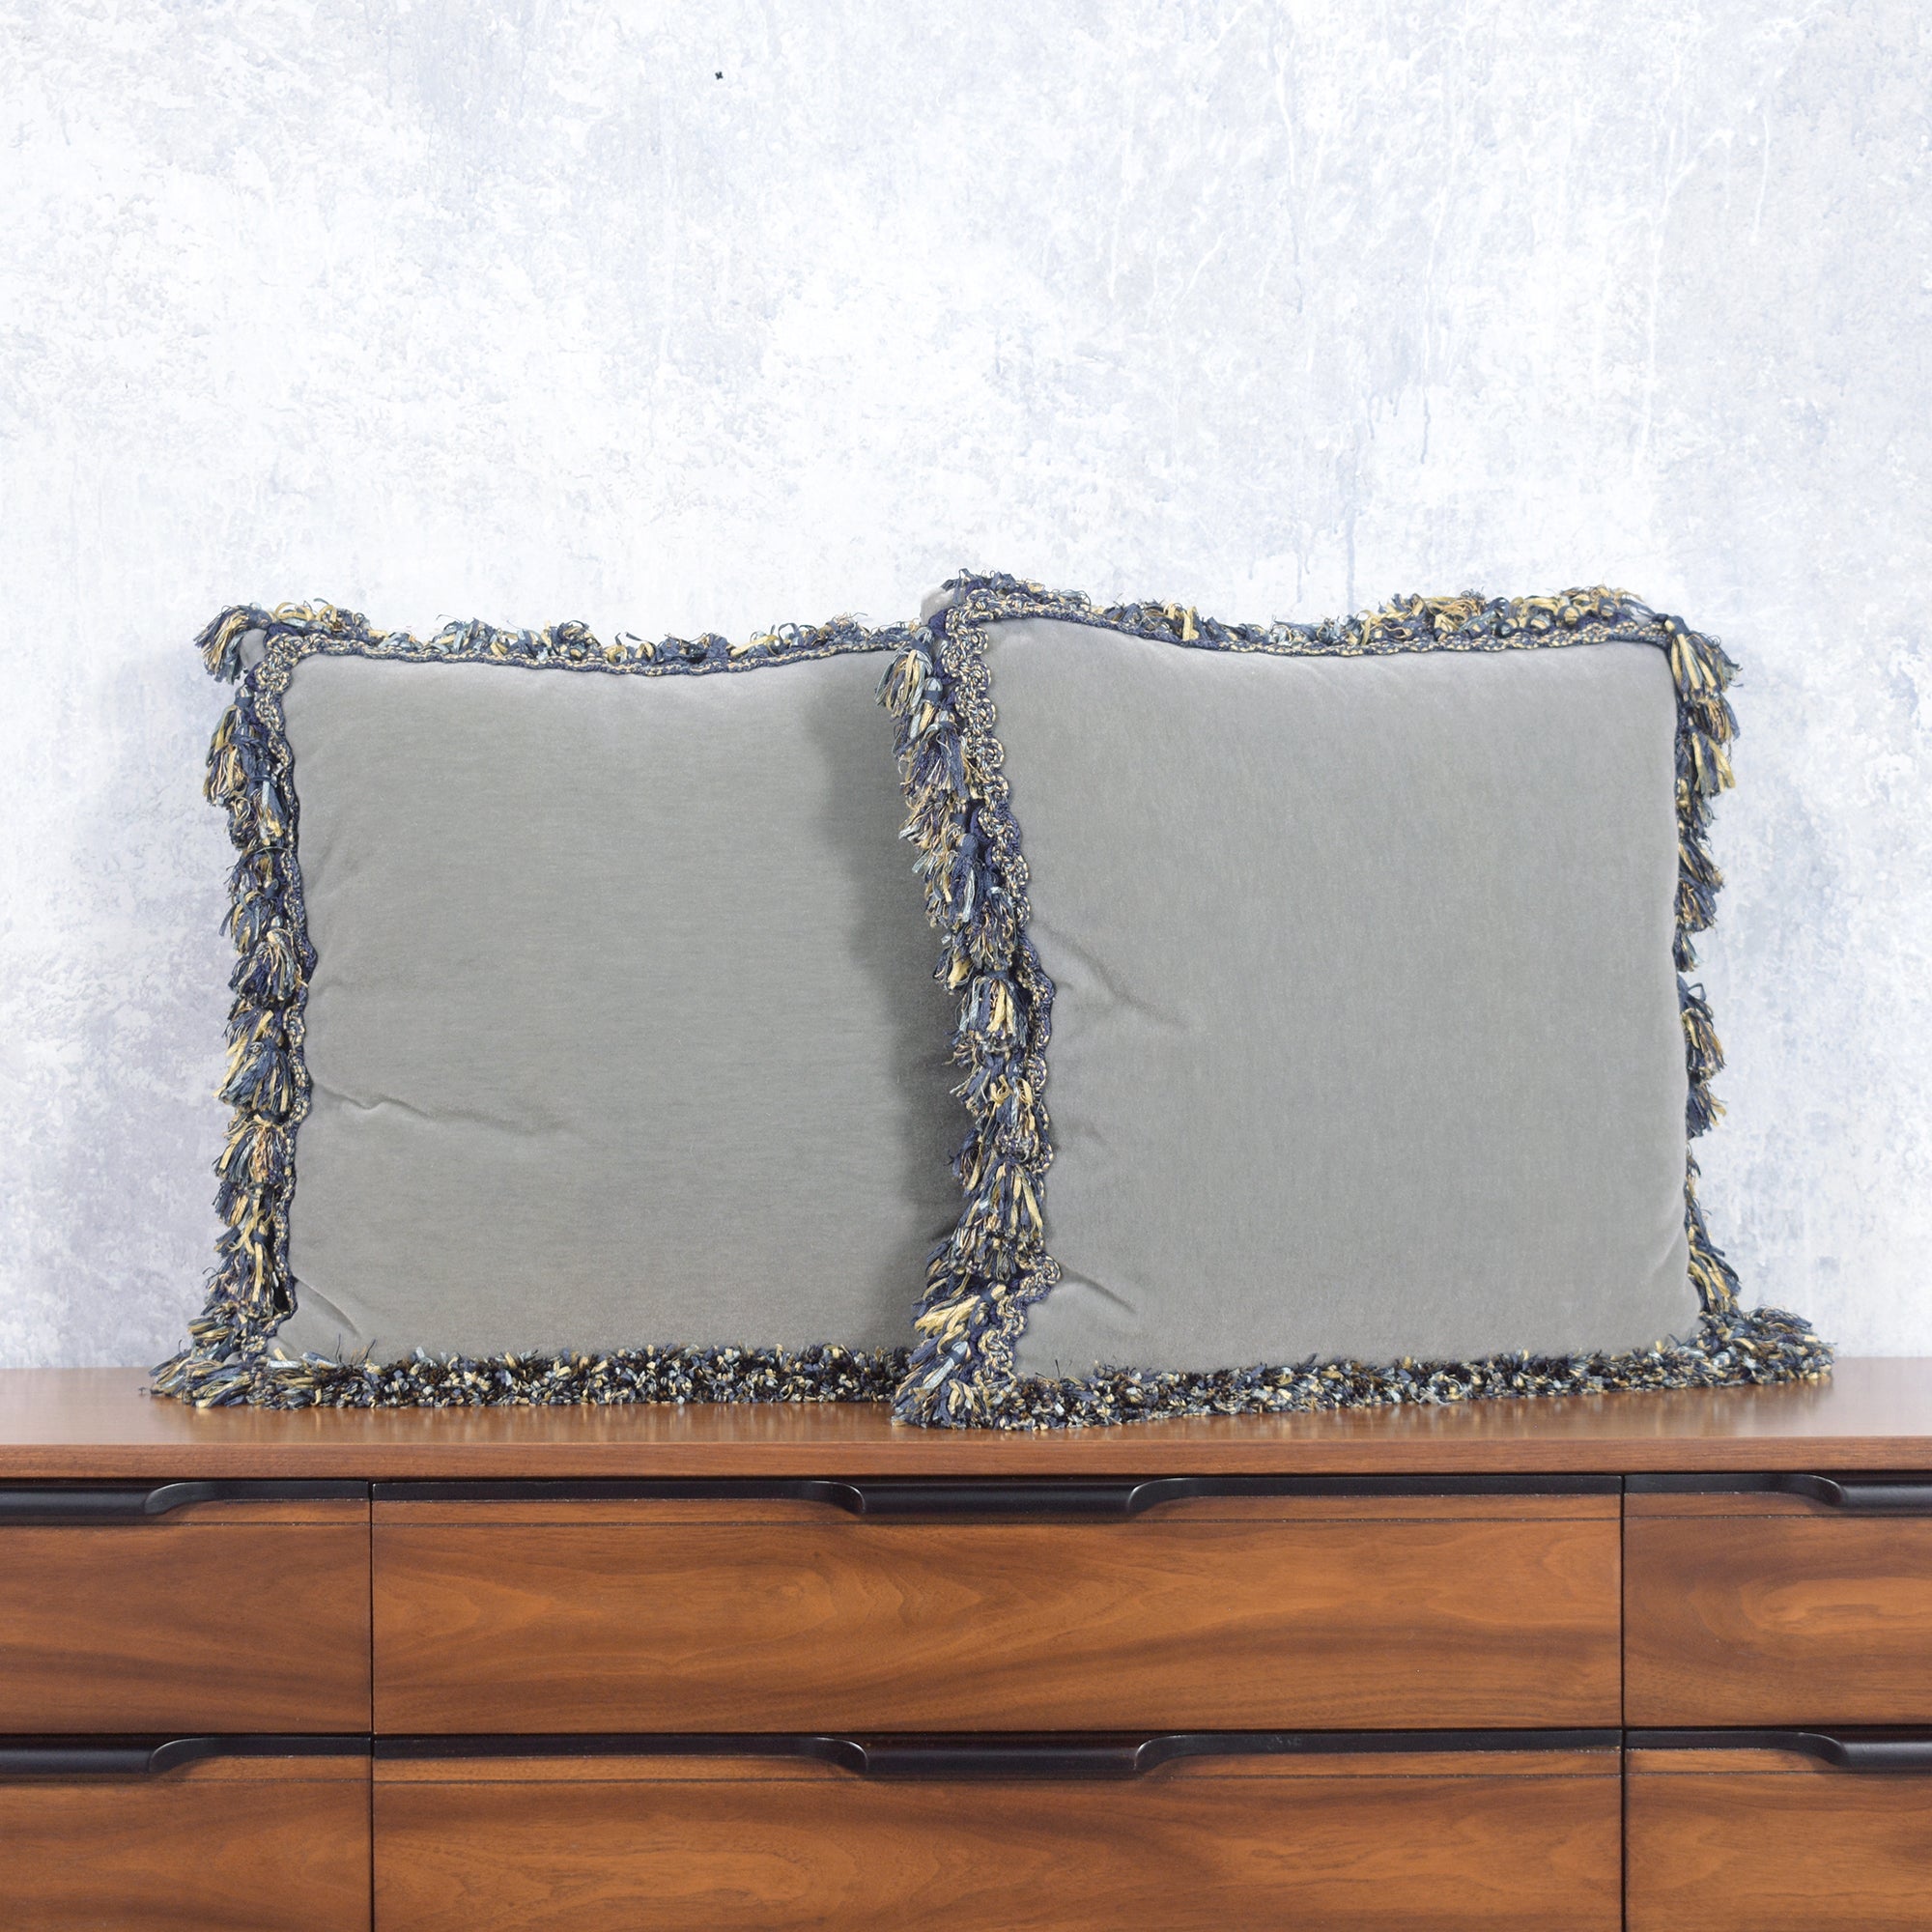 Embrace the elegance and comfort of our lovely pair of mohair throw pillows, a sophisticated addition to any living or bedroom space. These pillows are beautifully crafted from two-tone color mohair fabric, providing both a luxurious feel and a